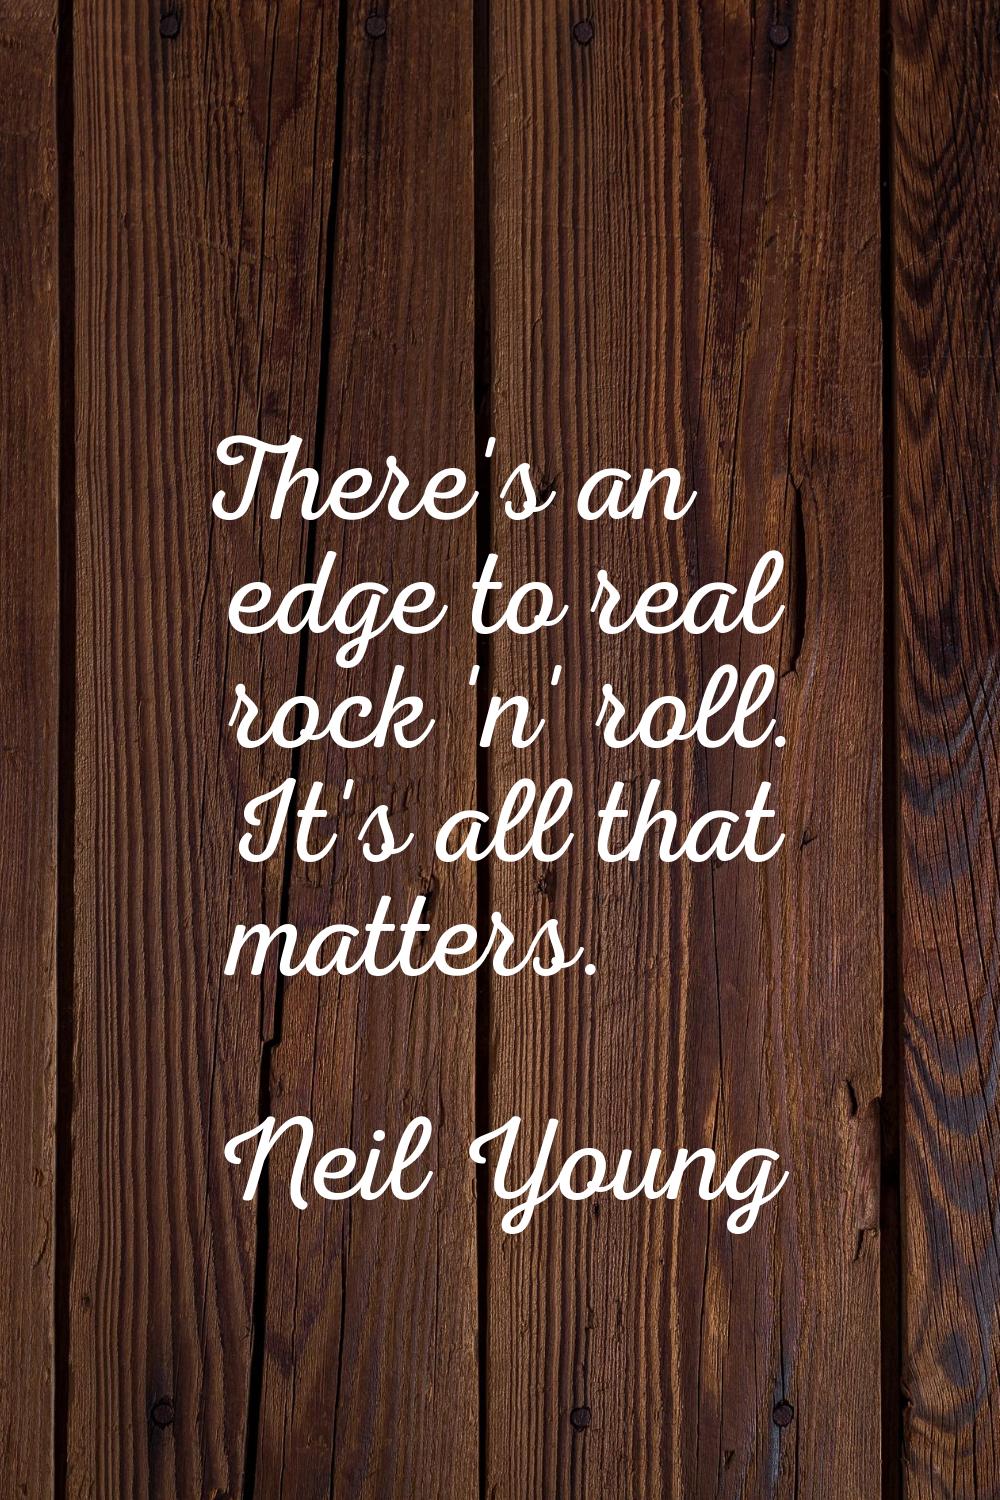 There's an edge to real rock 'n' roll. It's all that matters.